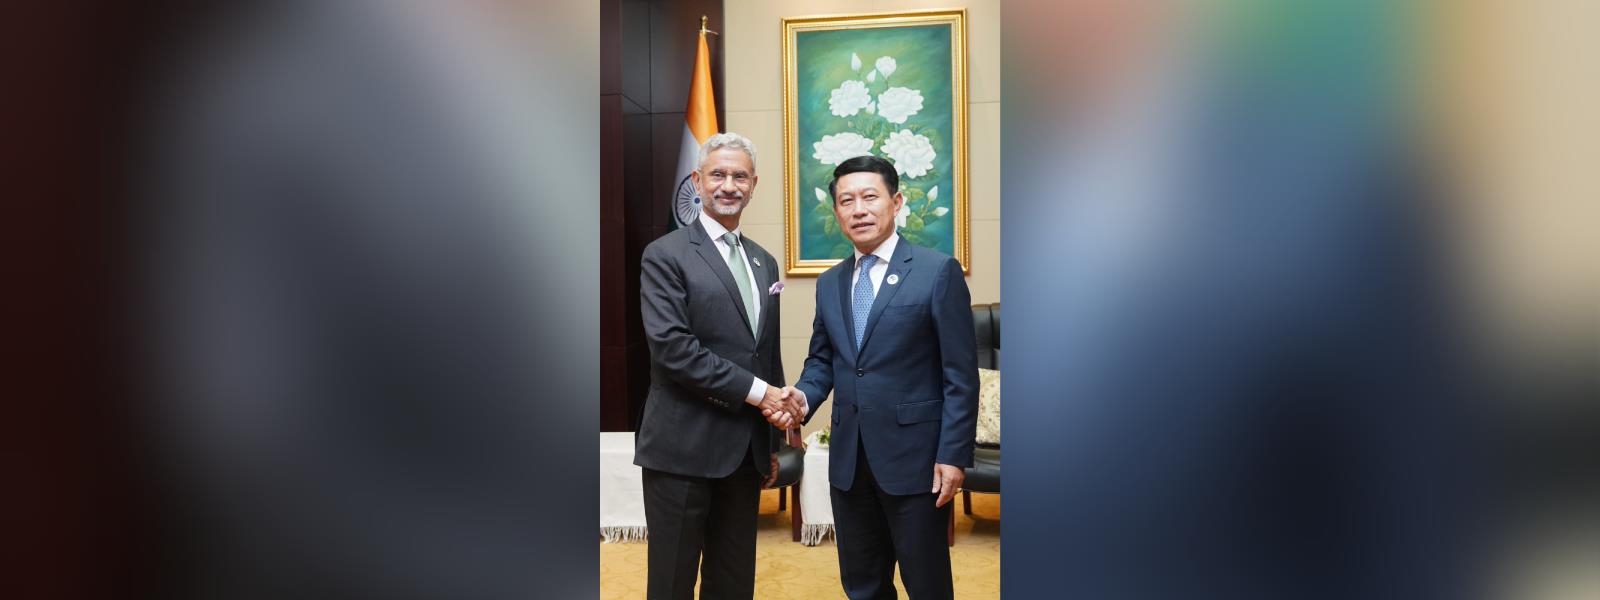 External Affairs Minister Dr. S. Jaishankar met H.E. Mr. Saleumxay Kommasith, Deputy Prime Minister and Foreign Minister of Lao PDR in Vientiane